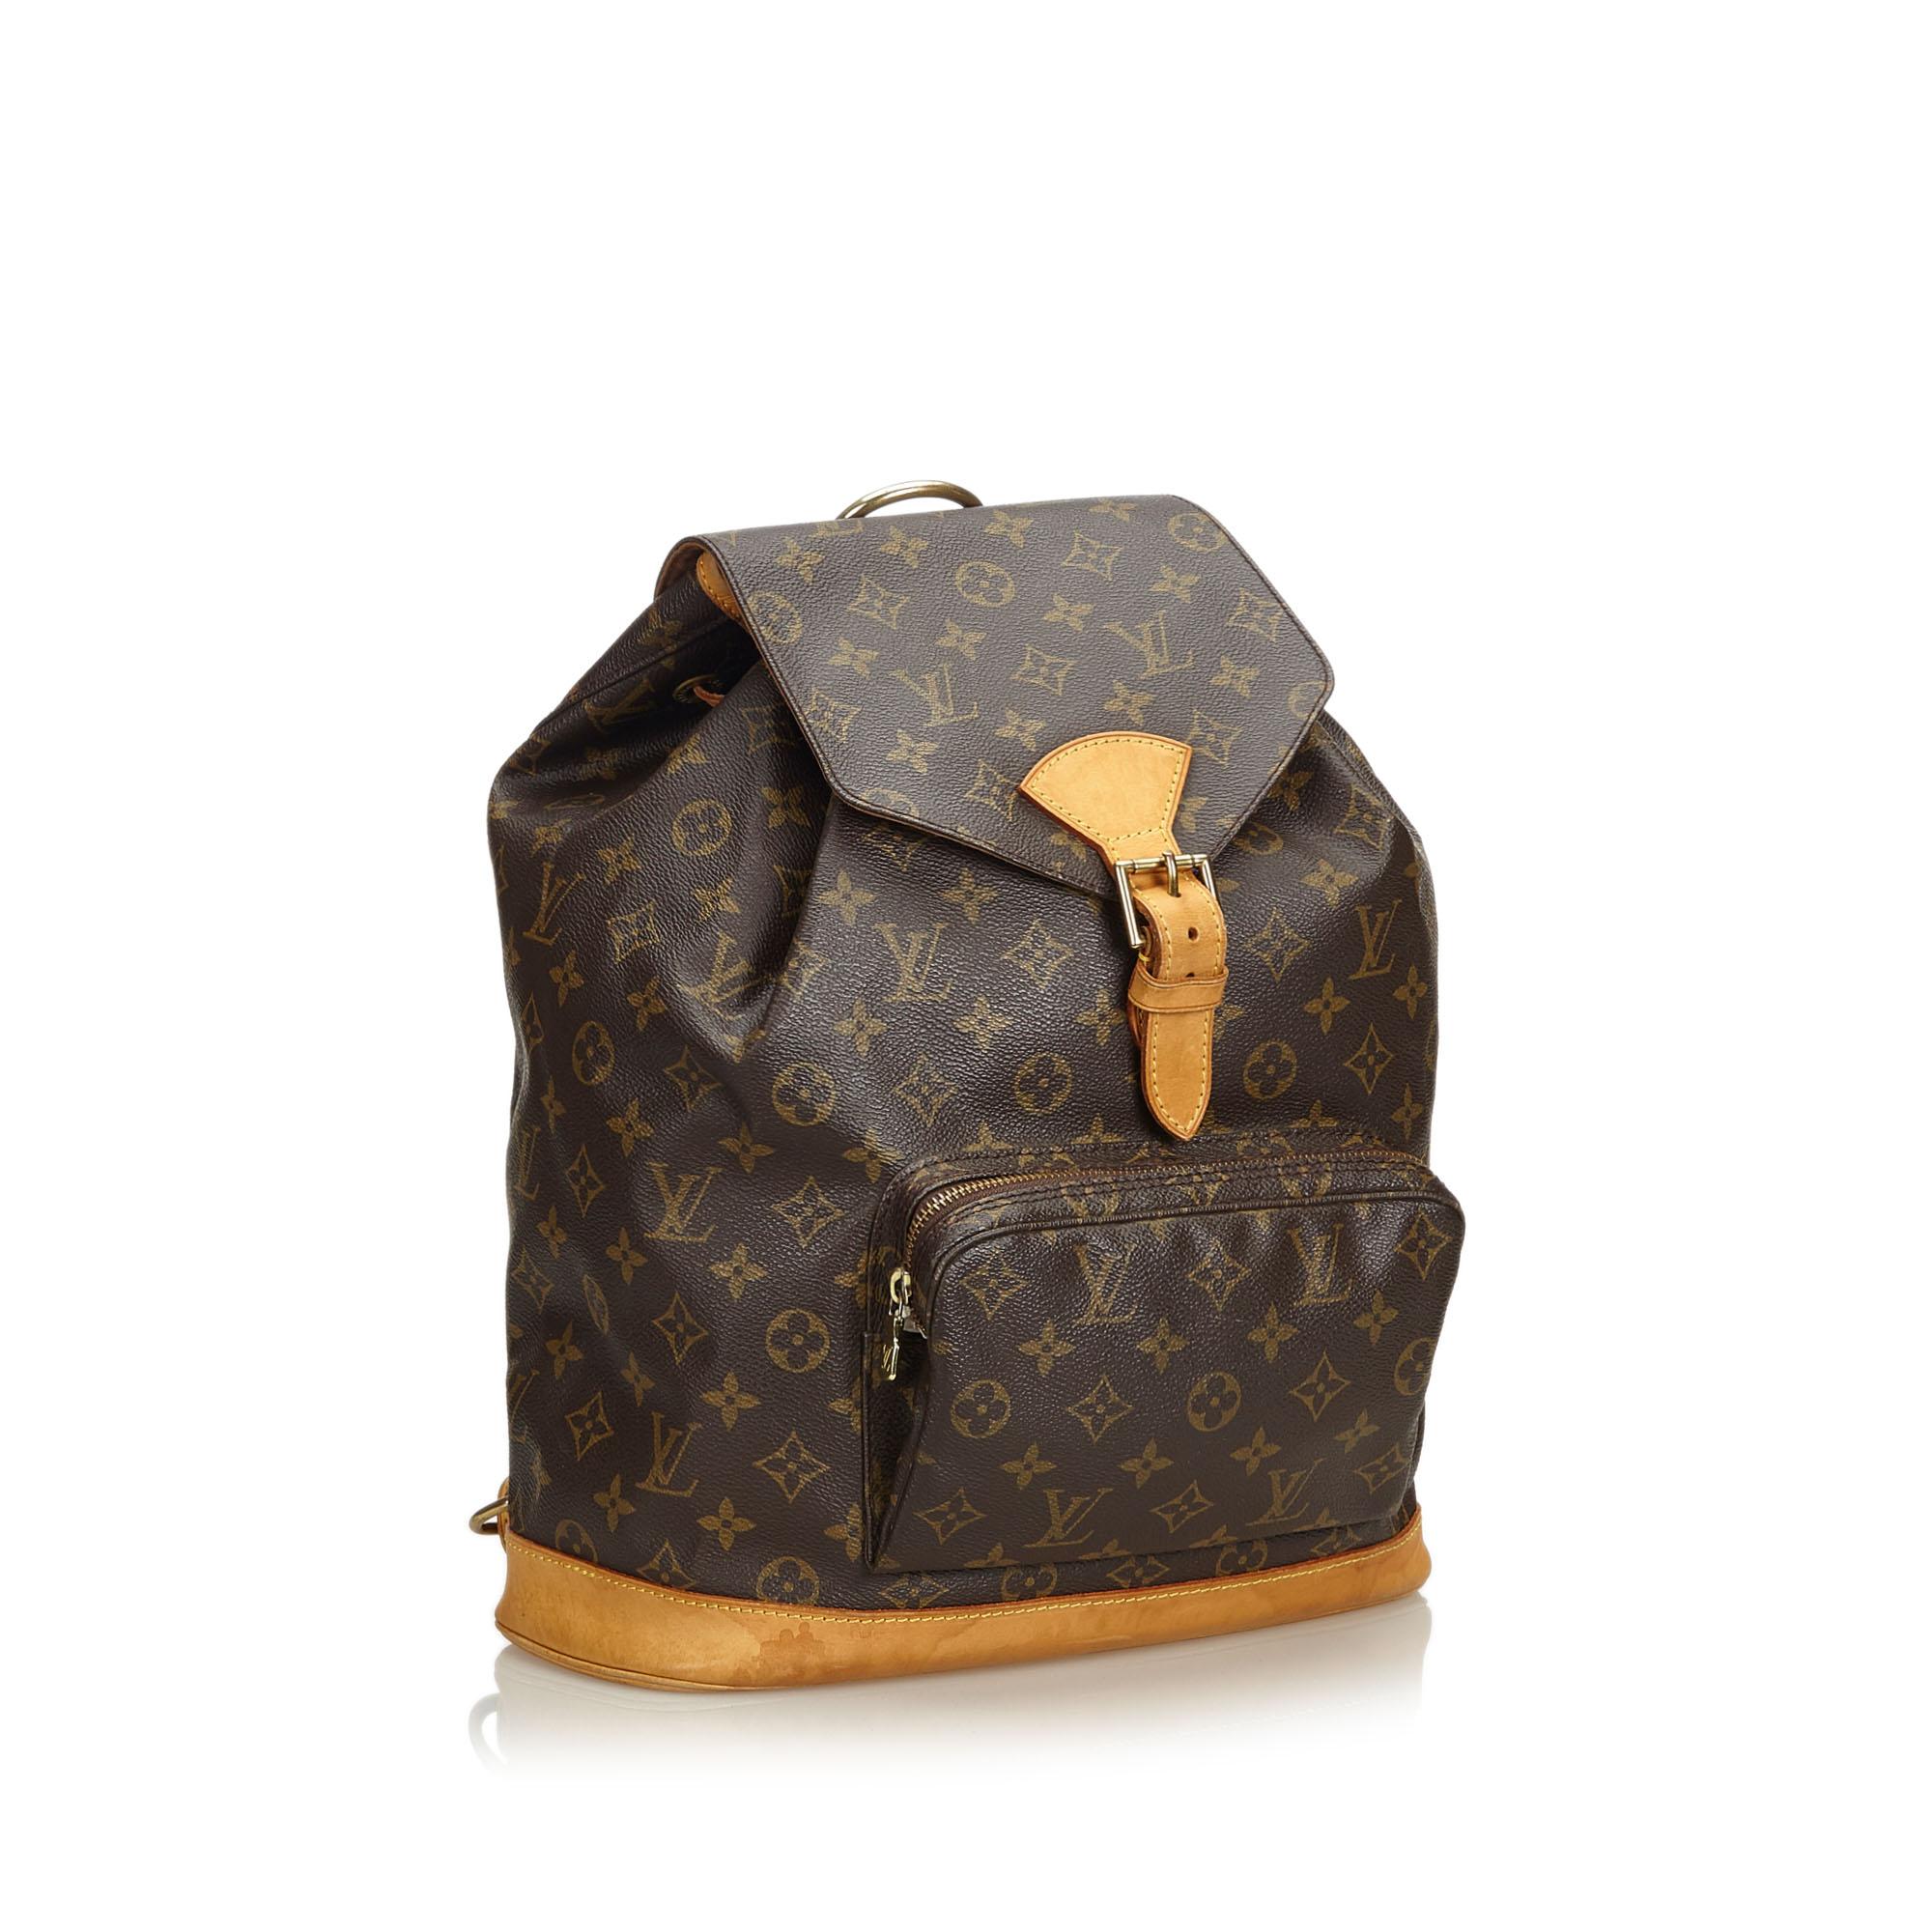 The Montsouris GM features a monogram canvas body, flat shoulder straps, a leather bottom, a front flap with a belt buckle detail and a magnetic closure, a top drawstring closure, and an interior slip pocket. It carries as B condition